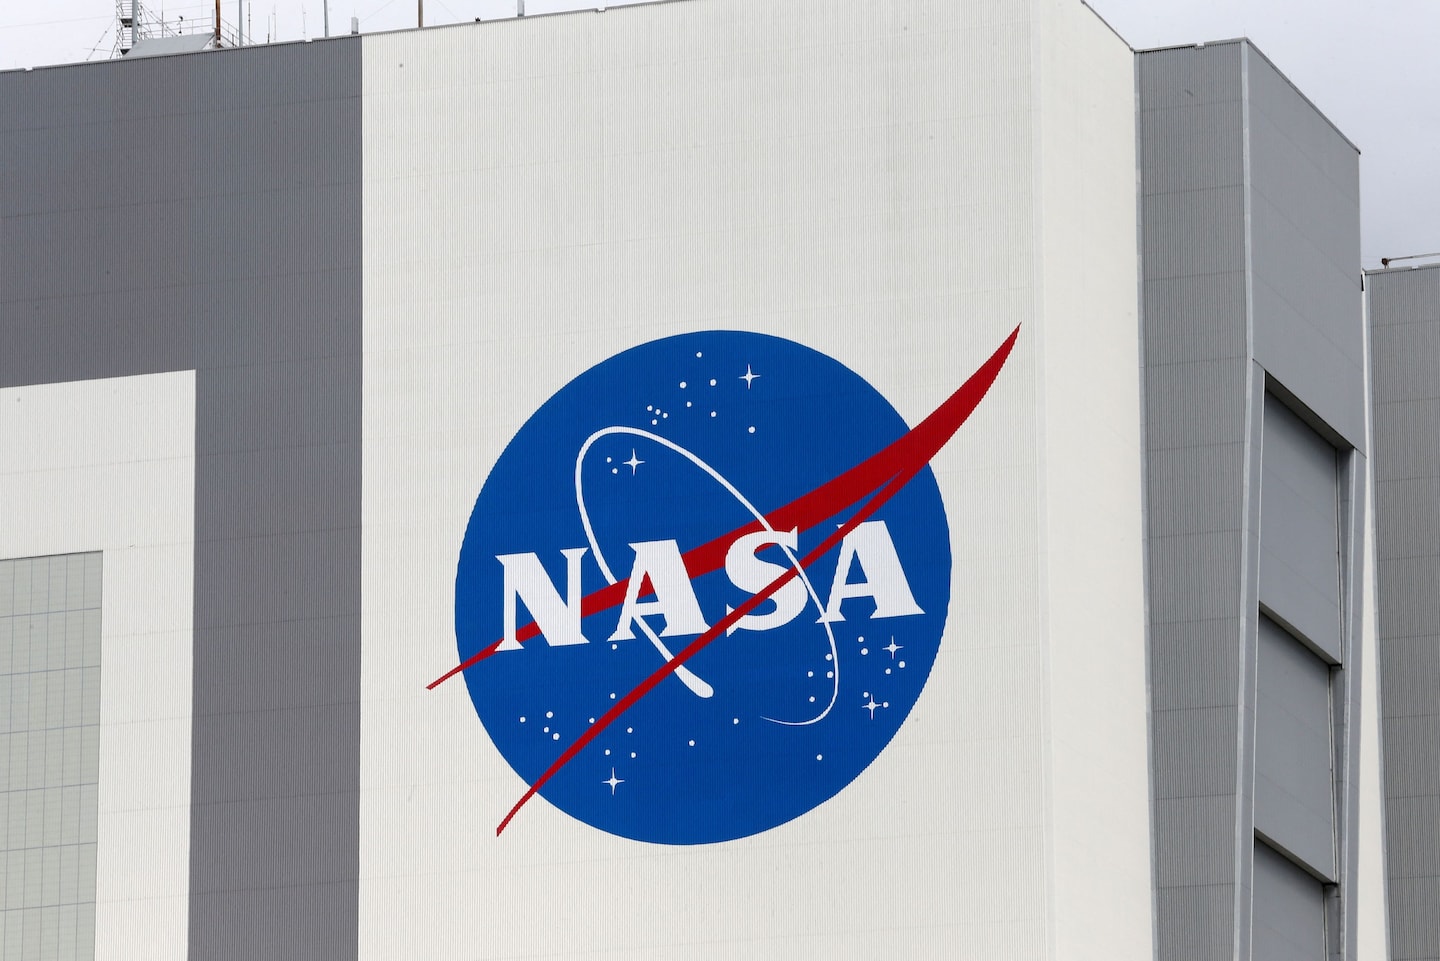 Florida family whose home was hit by space debris files claim against NASA – The TechLead